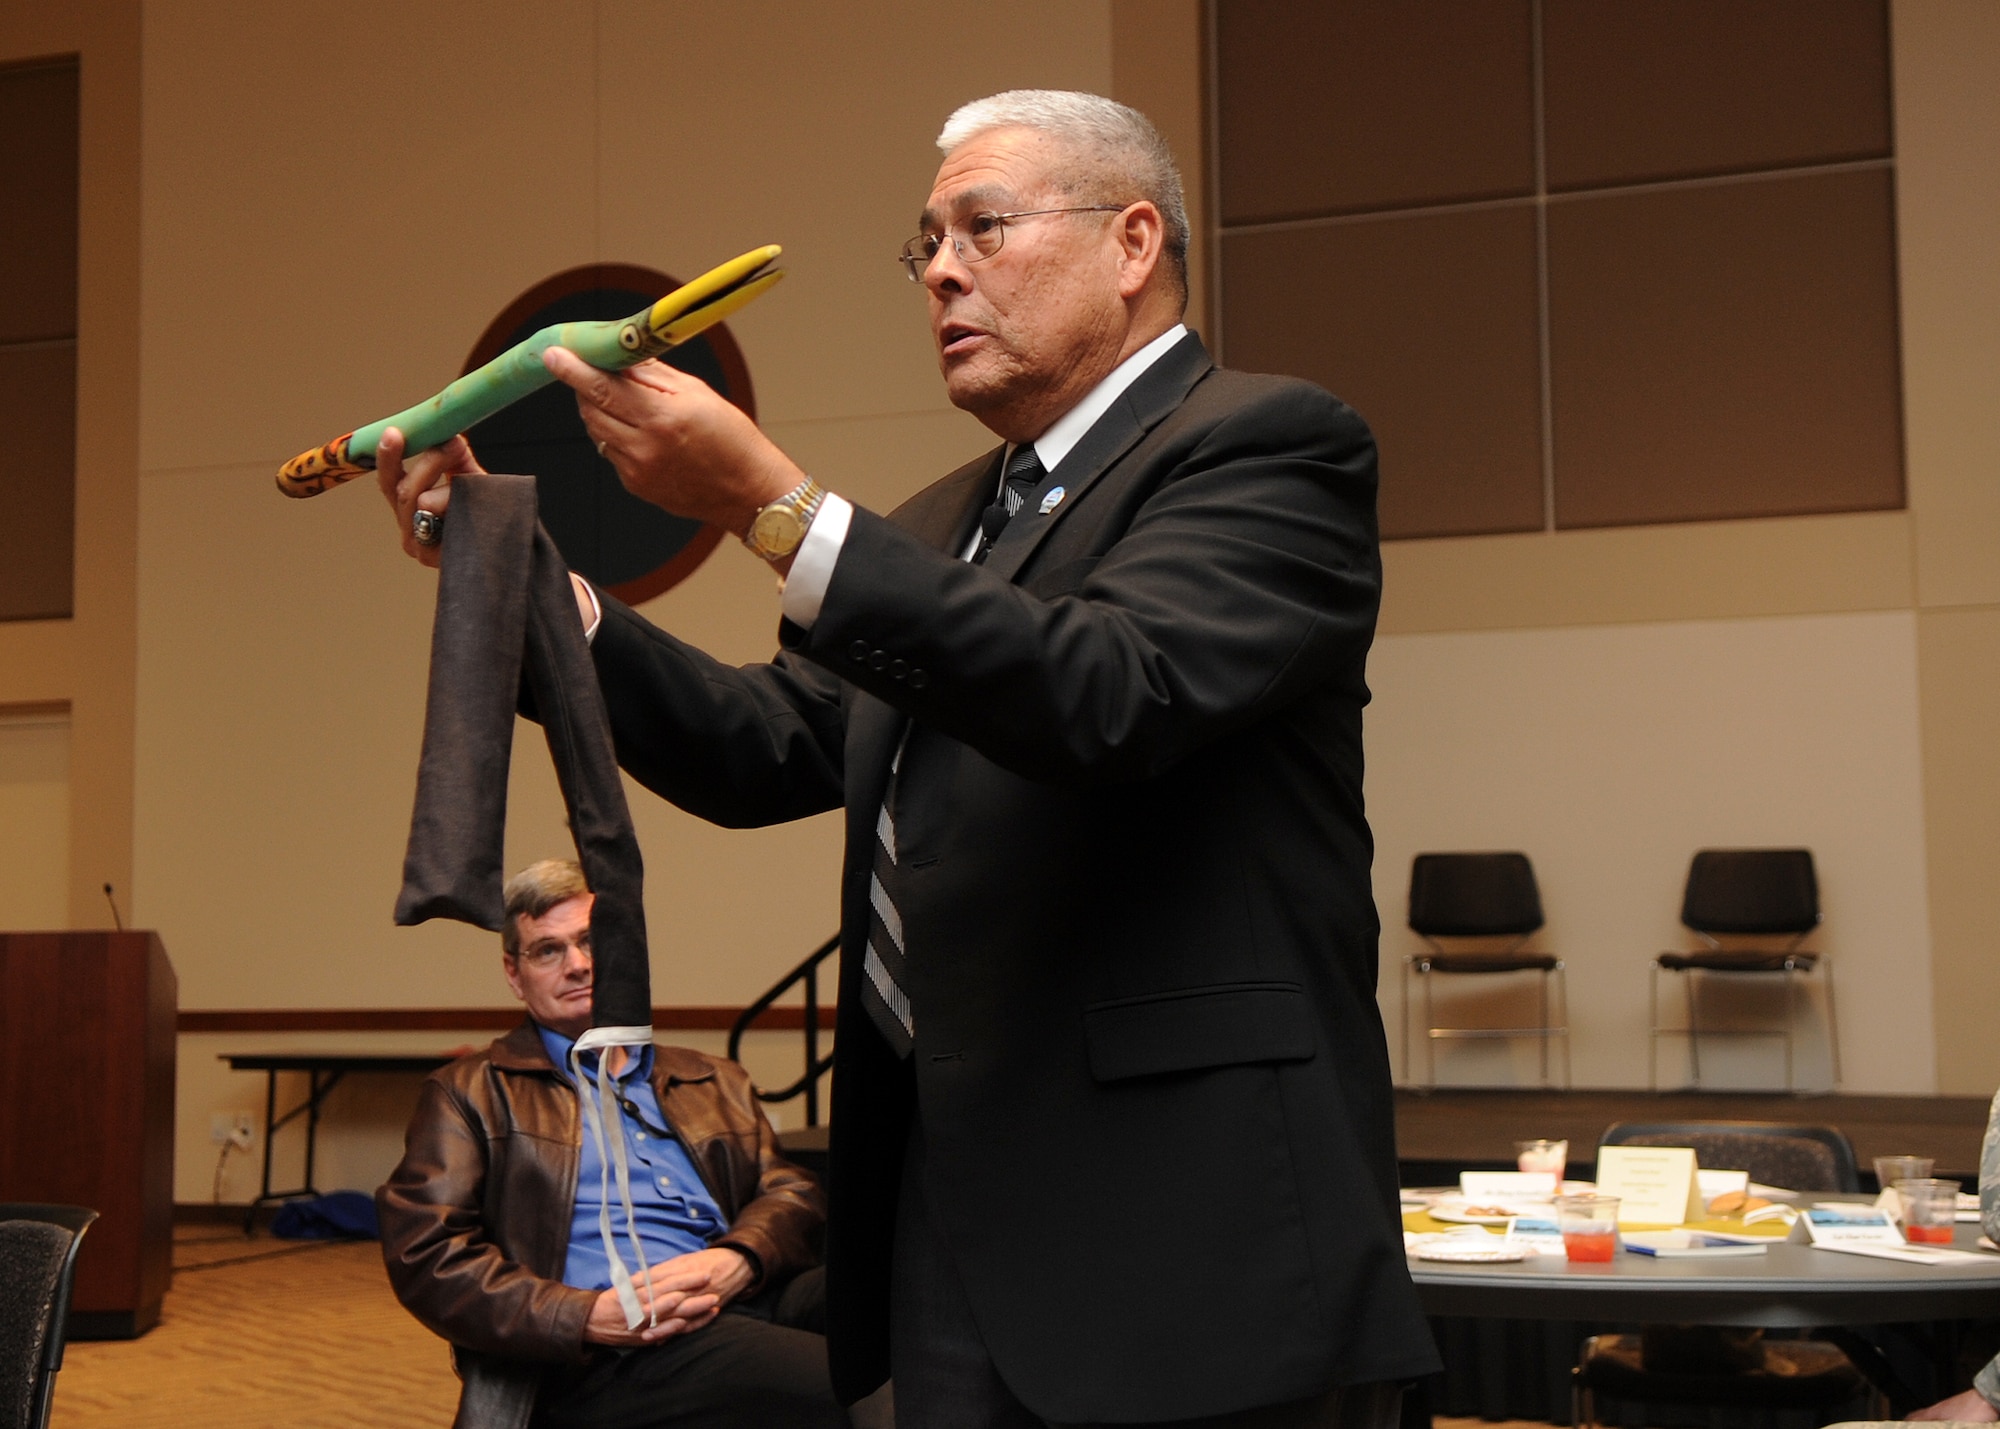 Buckley Air Force Base, Colo.-  Guest speaker, Chief Master Sergeant (Ret.) Bob Vasquez holds up a "talking stick" often used as a remedy to prevent interruptions during social gatherings.  ( U.S. Air Force Photo by Airman 1st Class Marcy Glass )
